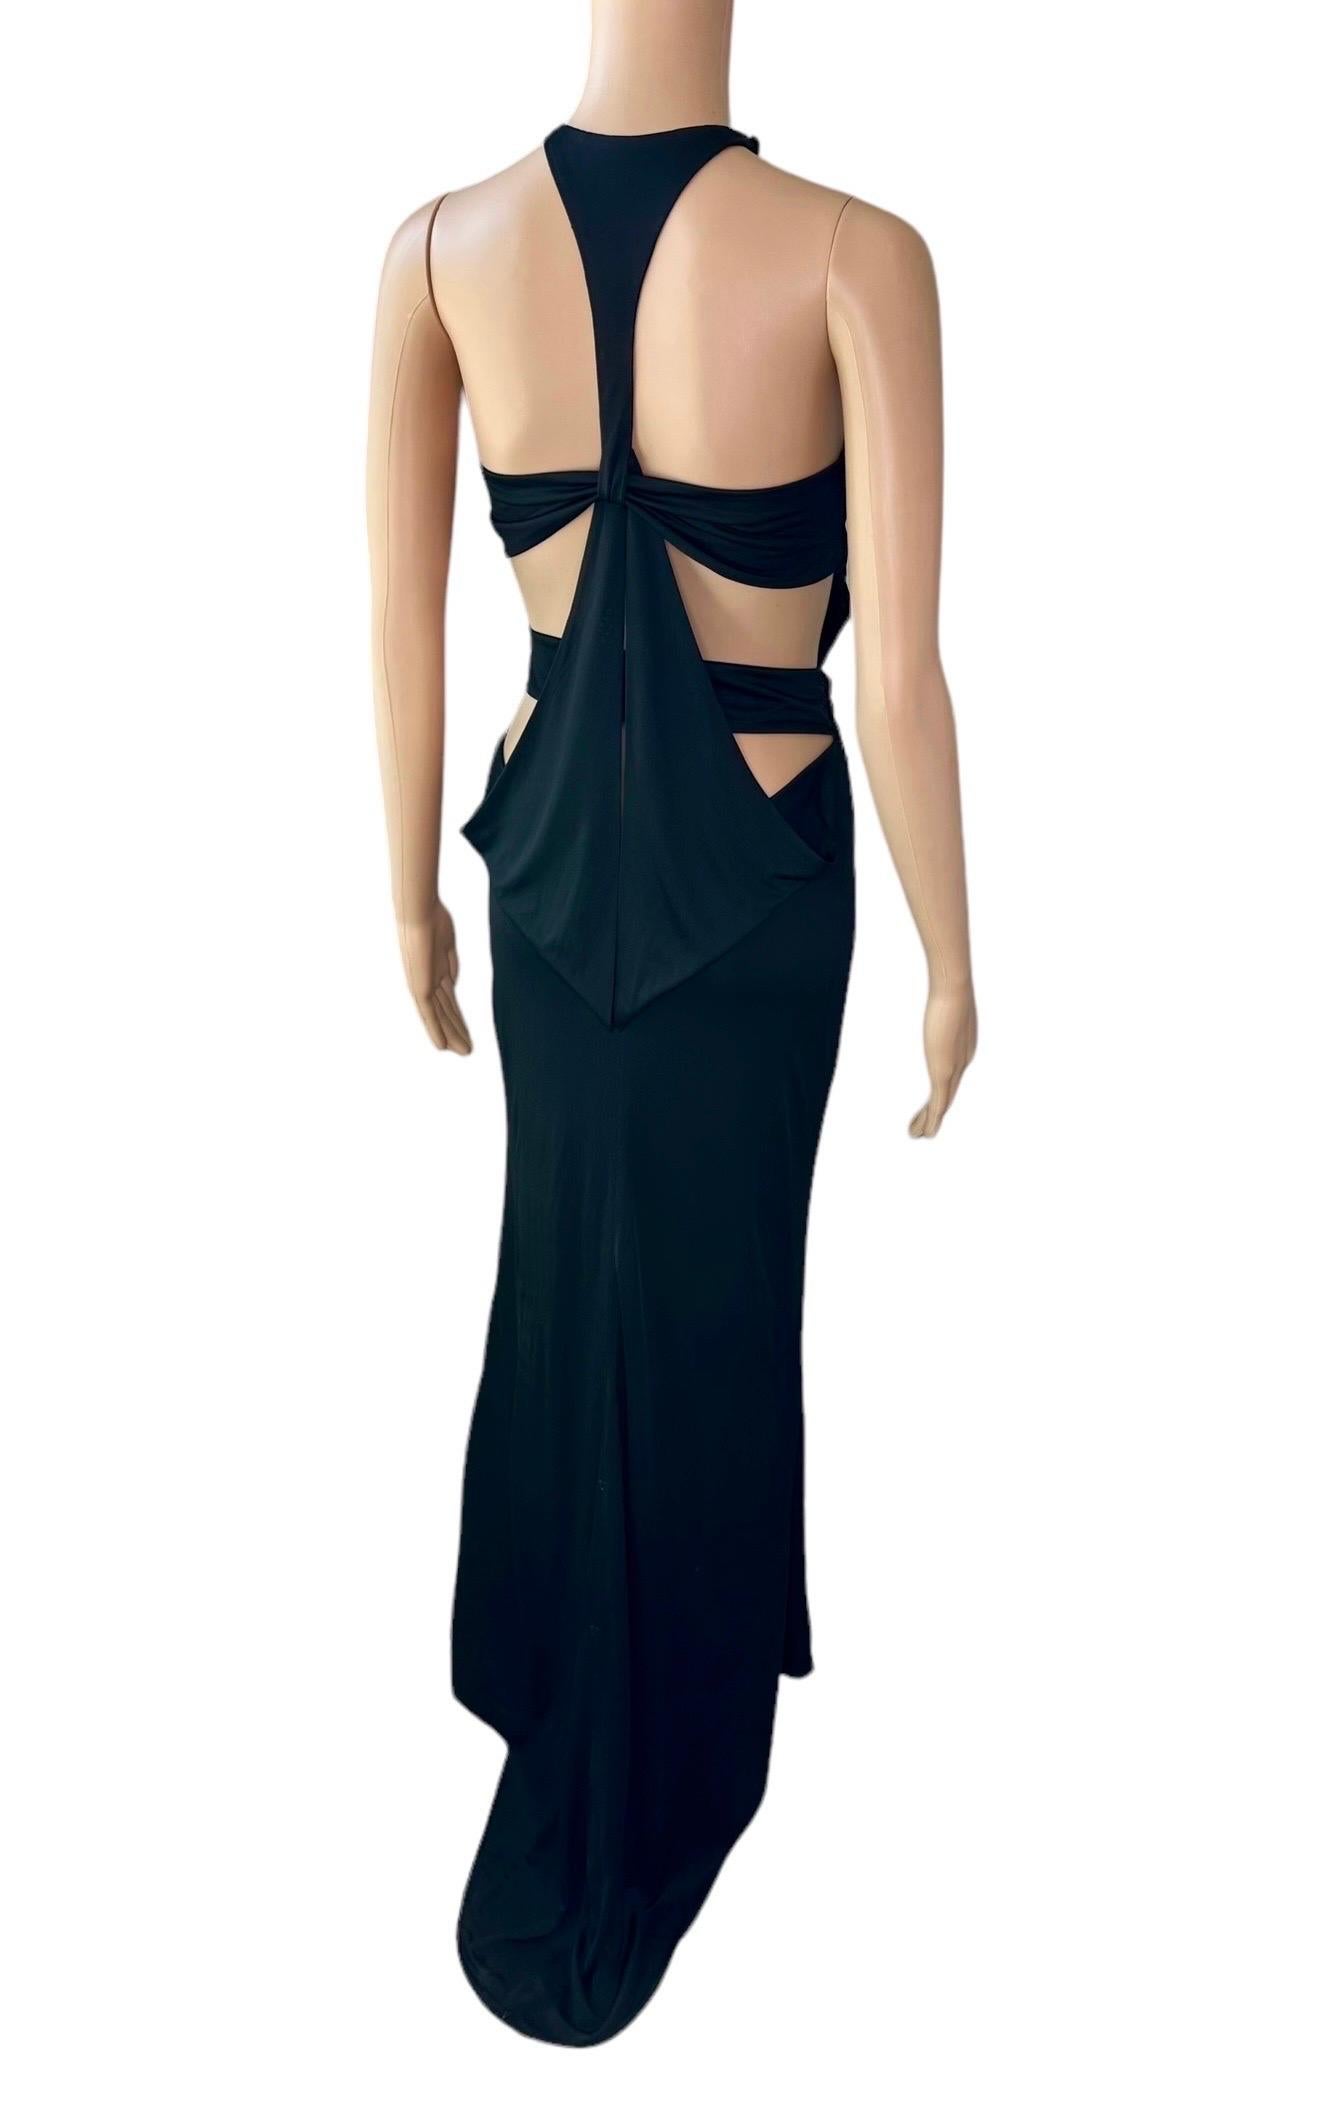 Tom Ford for Gucci F/W 2004 Embellished Plunging Cutout Black Evening Dress Gown For Sale 3